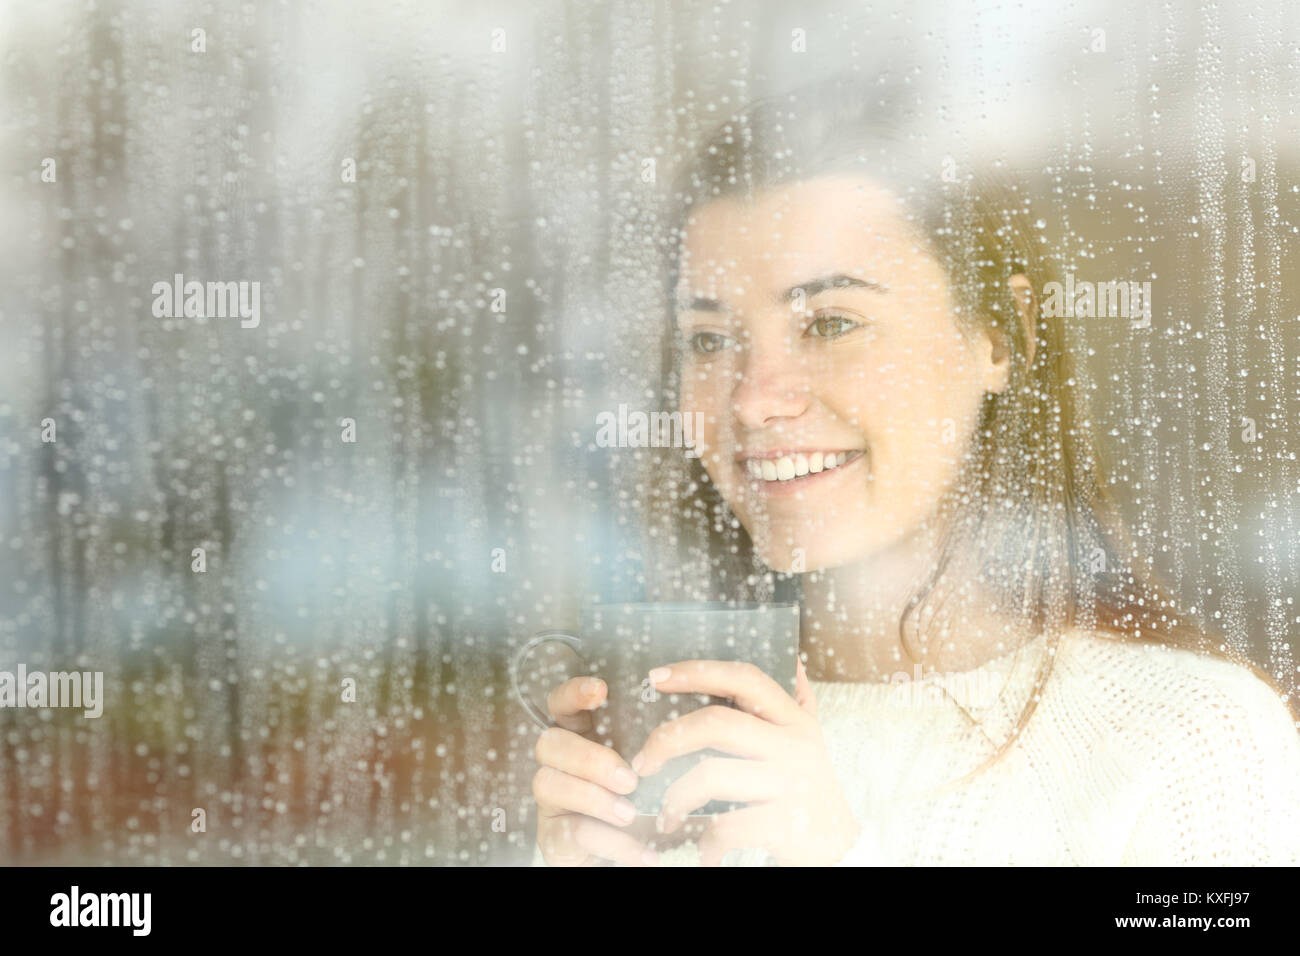 Positive happy teen looking through a window holding a coffee mug in a rainy day Stock Photo